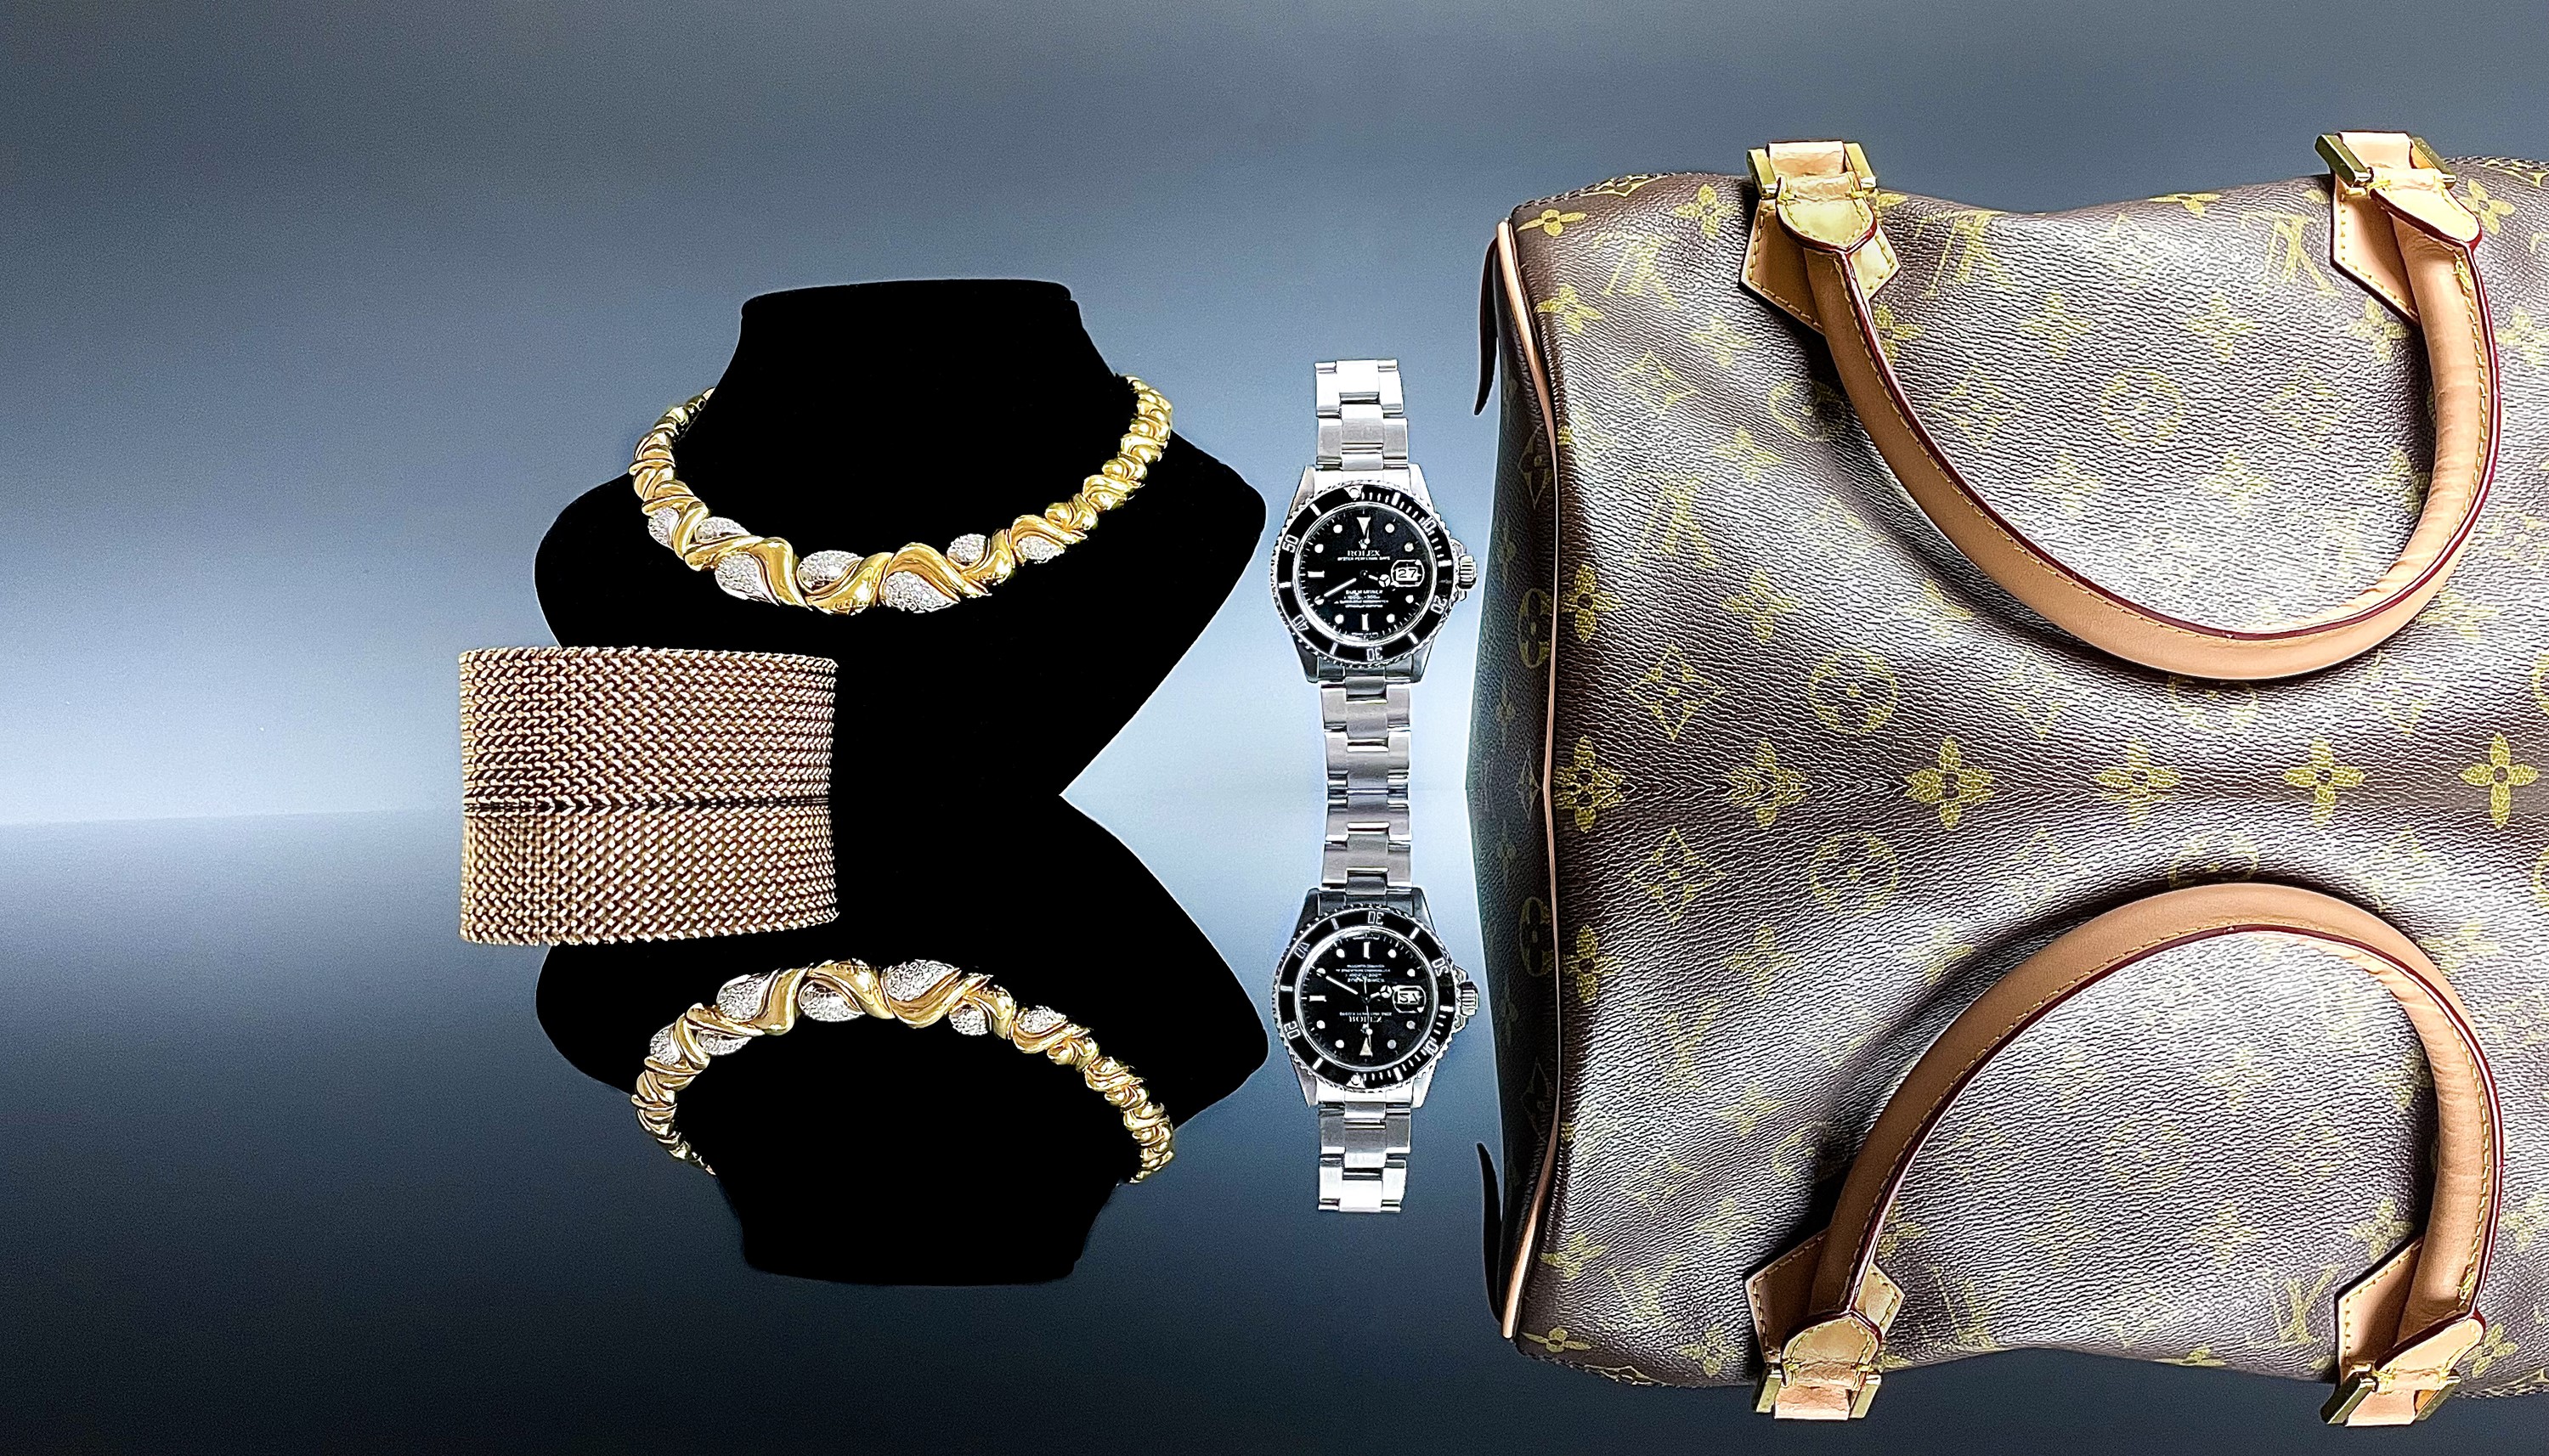 Jewellery, Watches, Luxury Fashion & Accessories